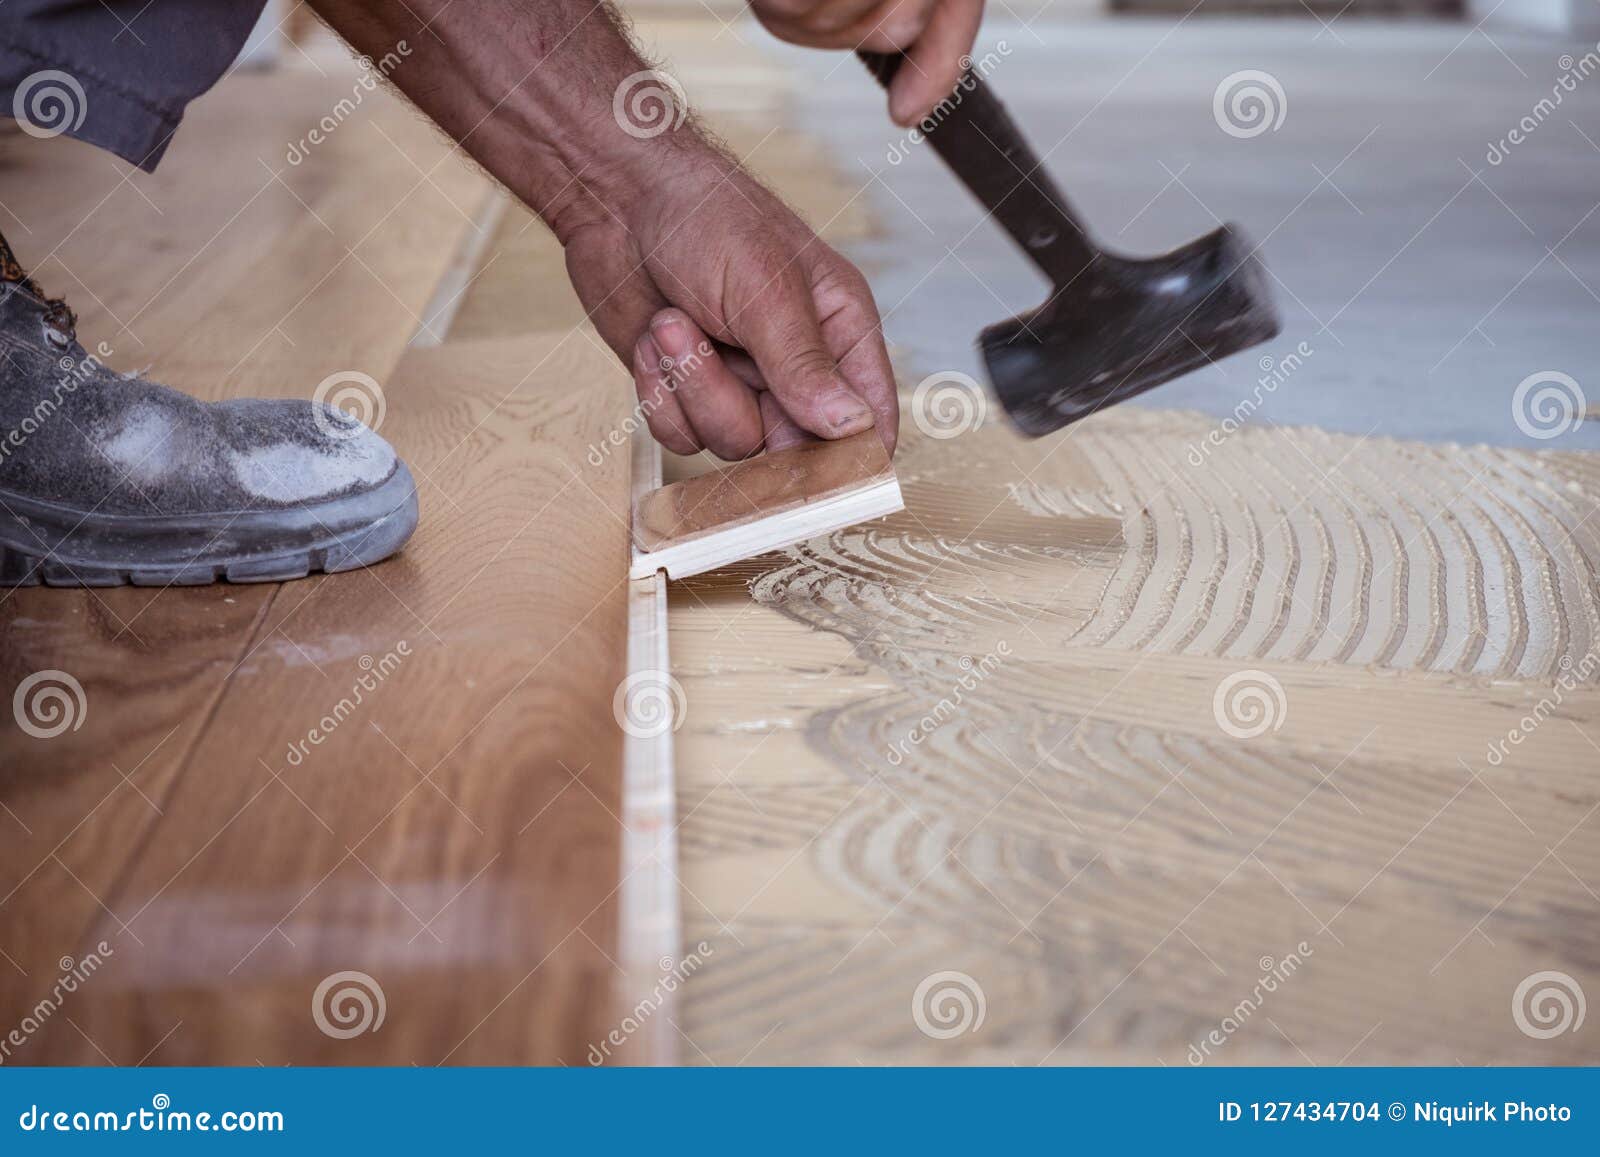 Worker Installing Wooden Flooring Boards Stock Photo Image Of